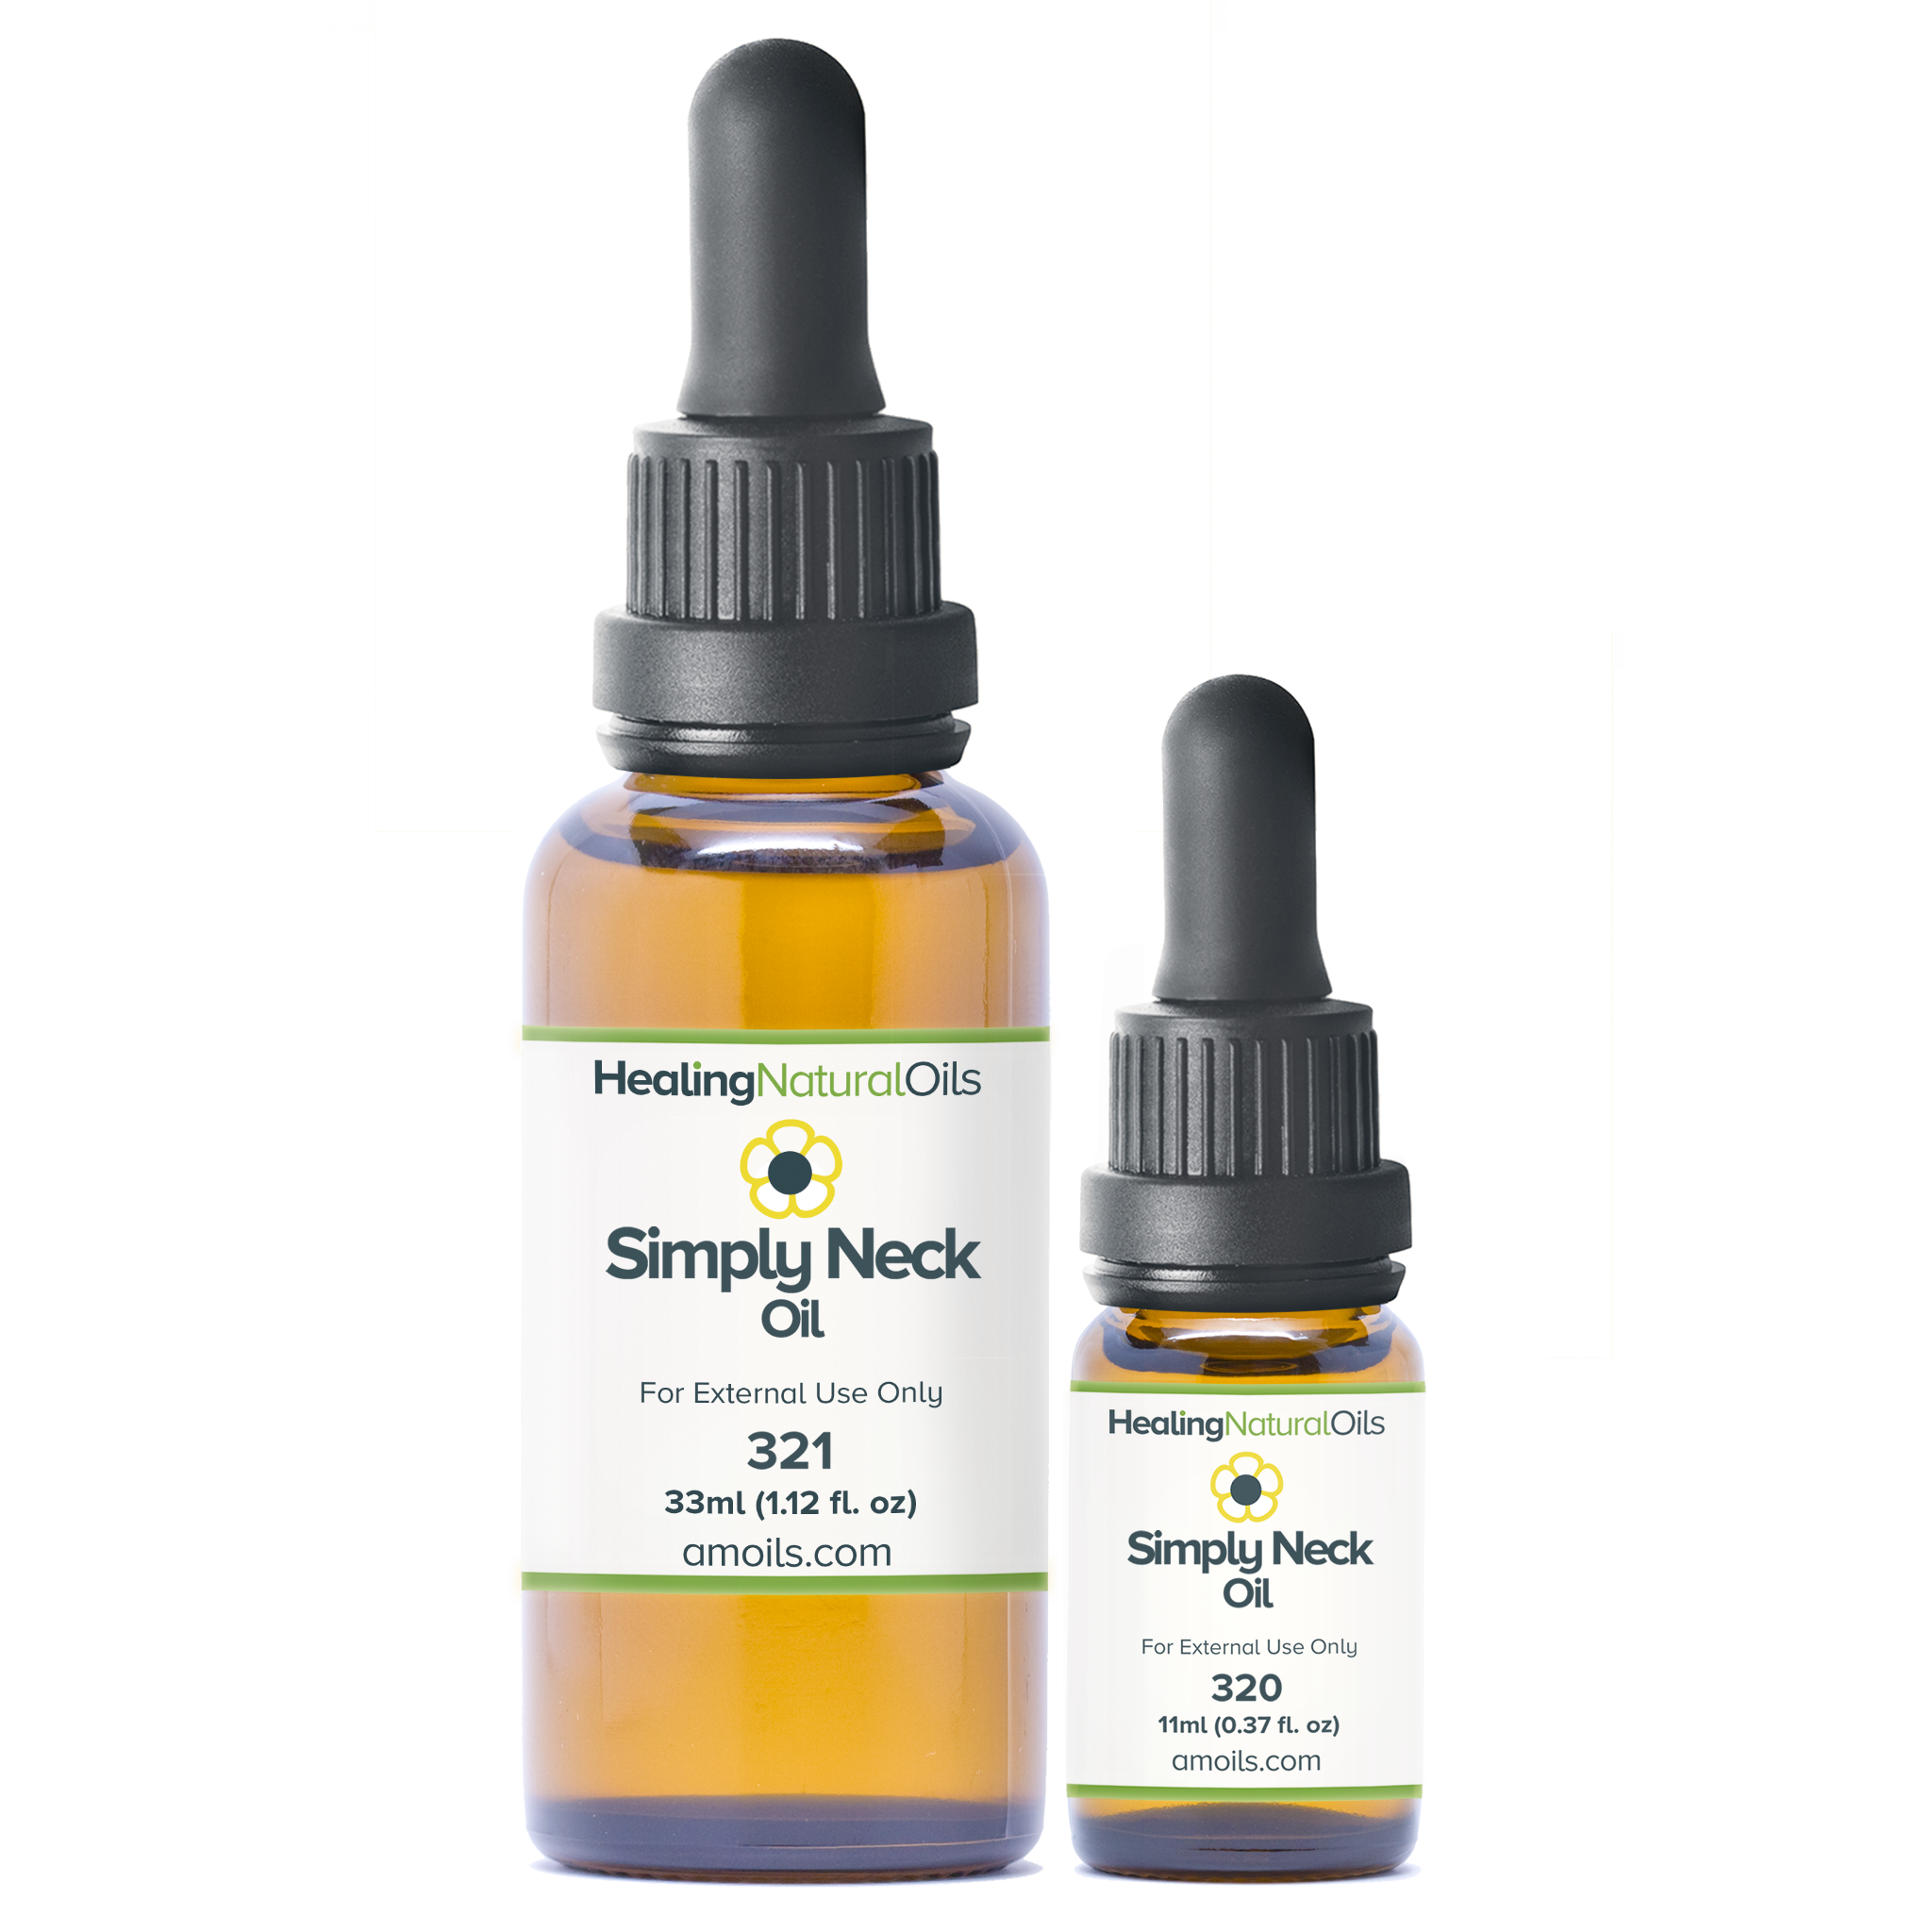 Simply Neck Oil